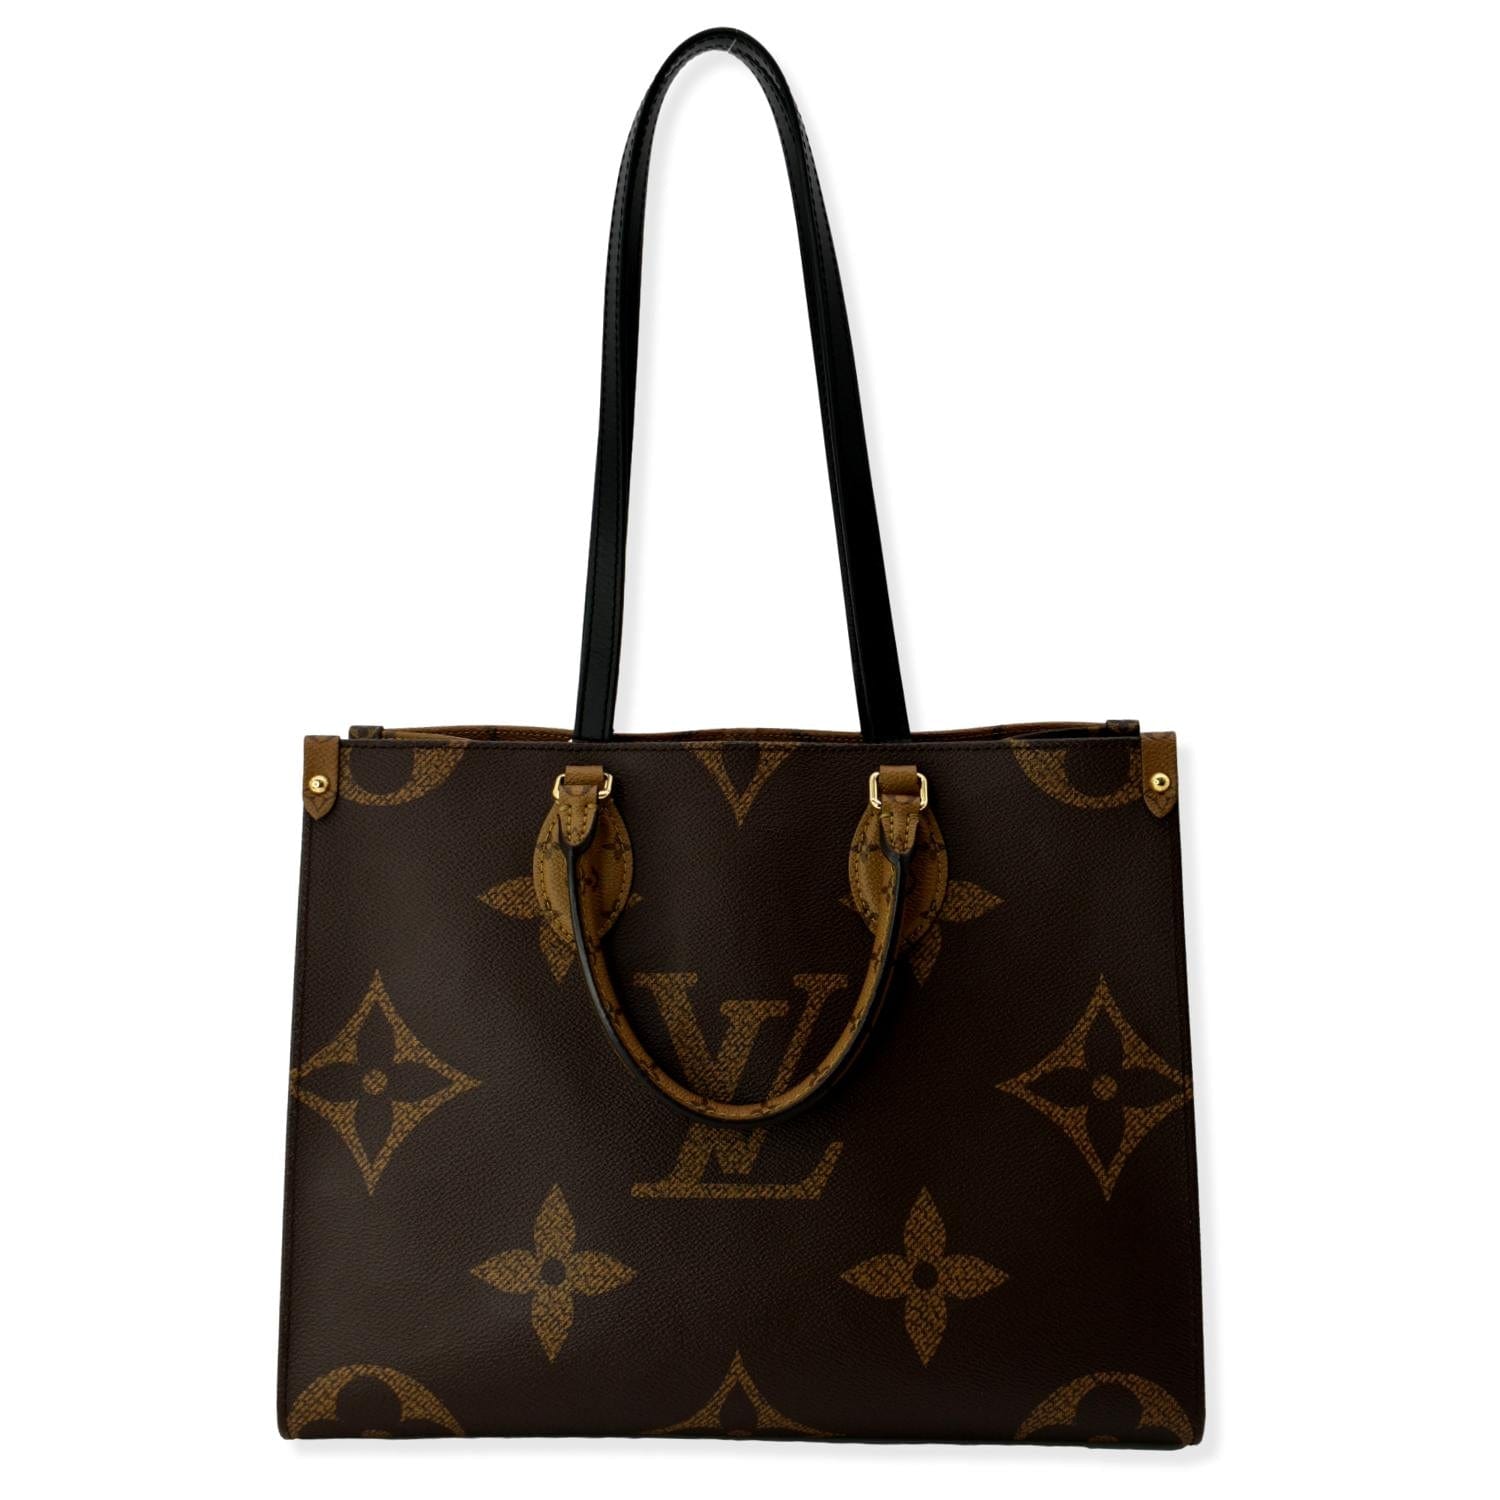 Tote Luxury Designer By Louis Vuitton Size: Large